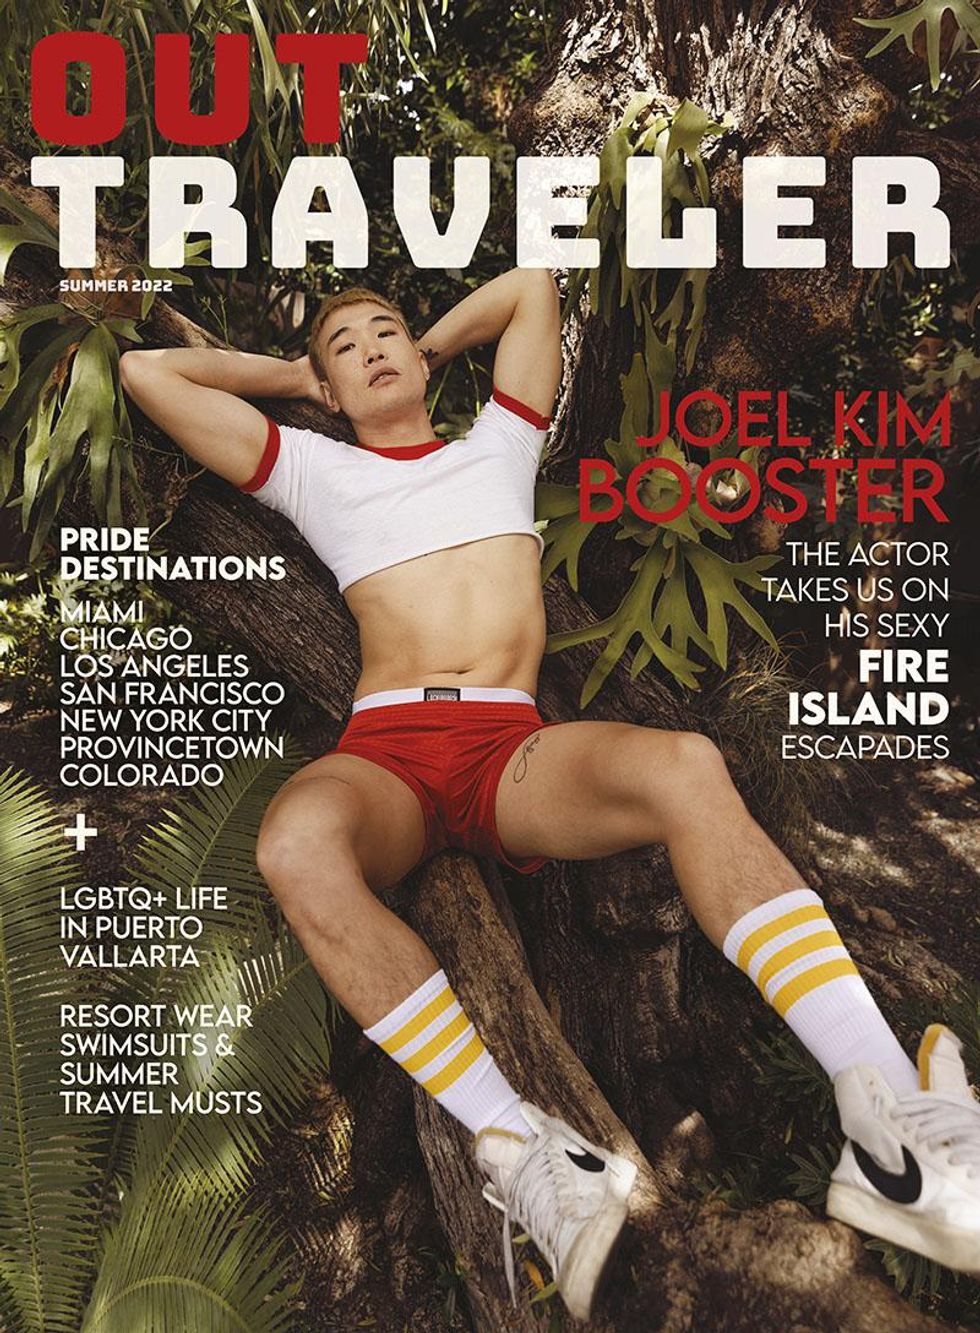 Joel Kim Booster Wears Speedos, Your Favorite Fire Island Gear in New Cover